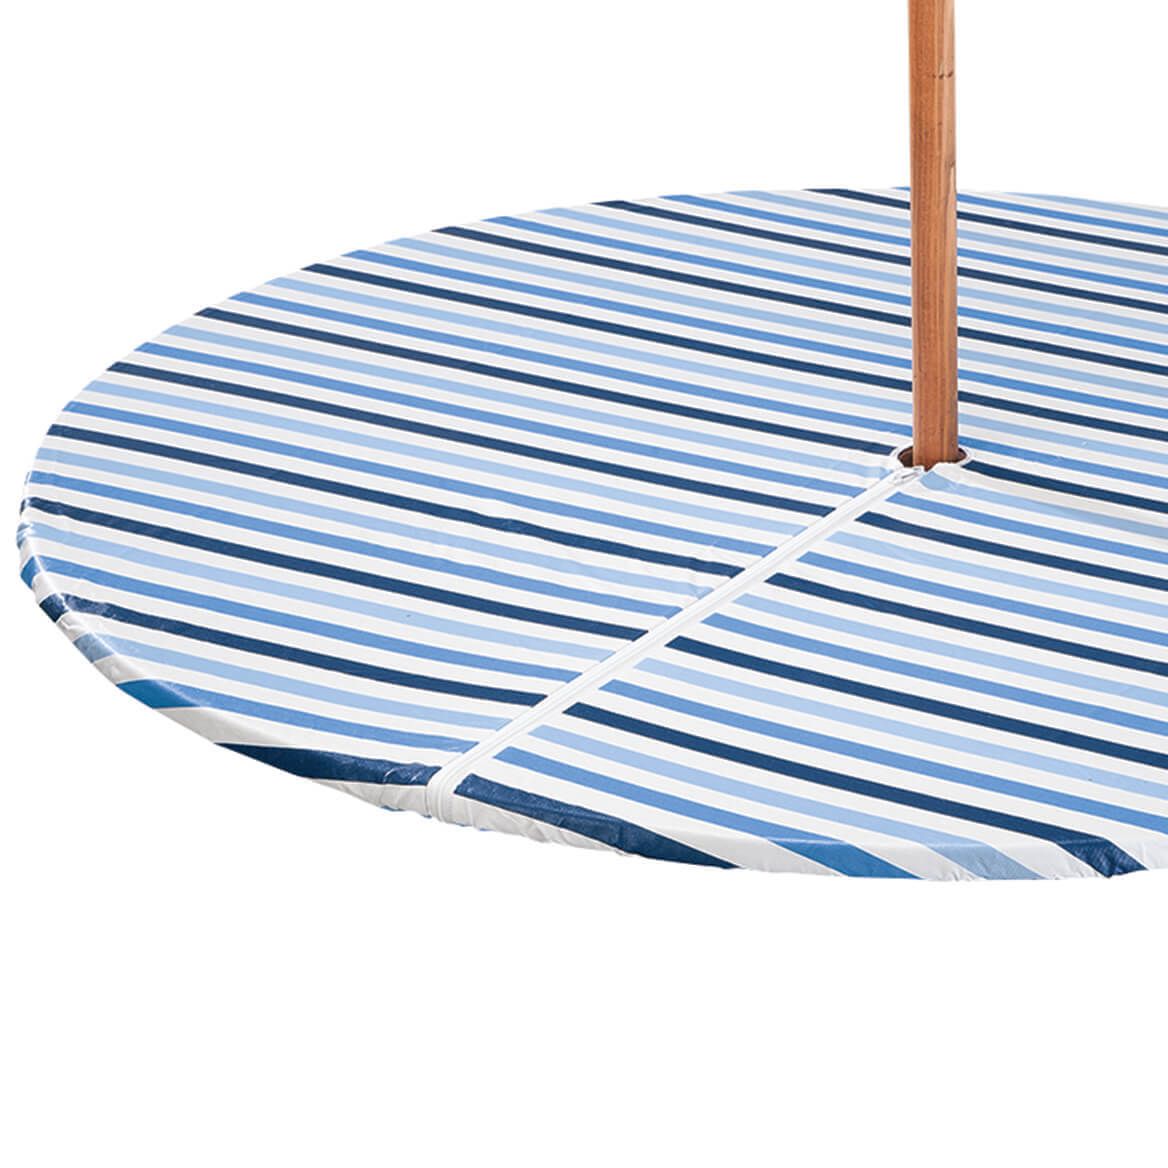 Blue Stripe Vinyl Zippered Elasticized Table Cover by Home-Style Kitchen™ + '-' + 367201